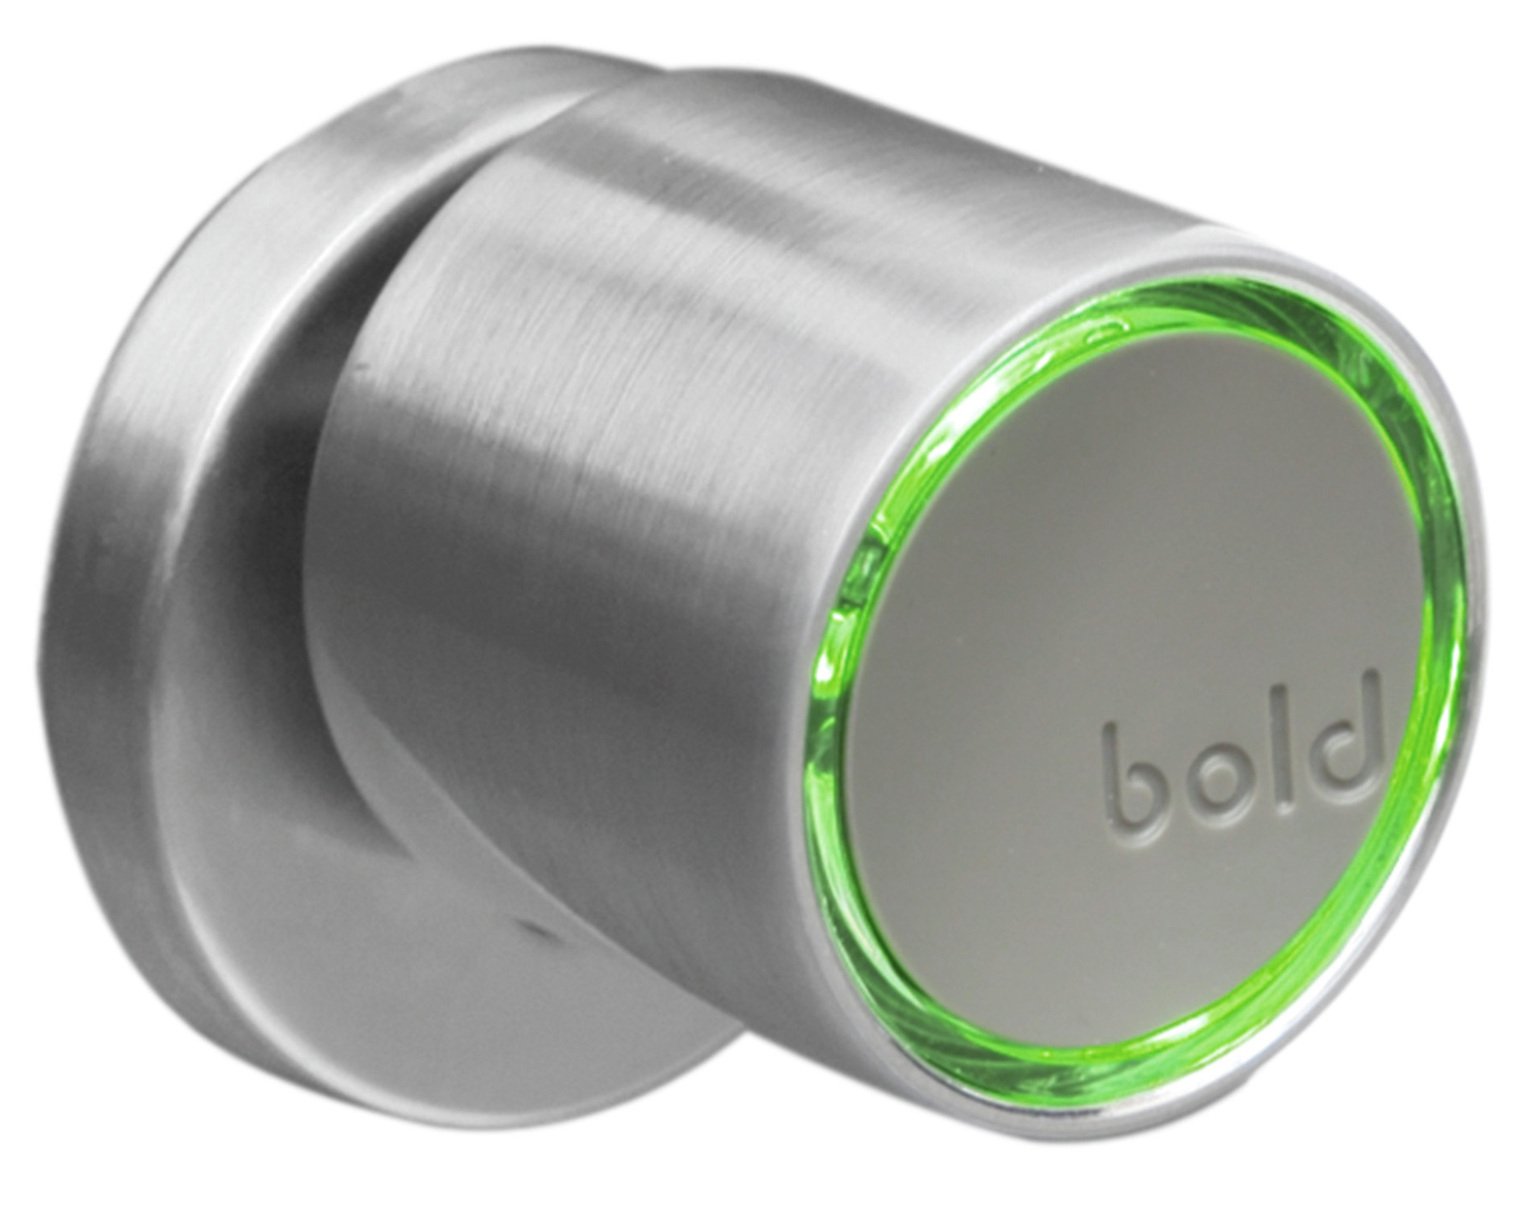 Bold Smart Cylinder Lock Review